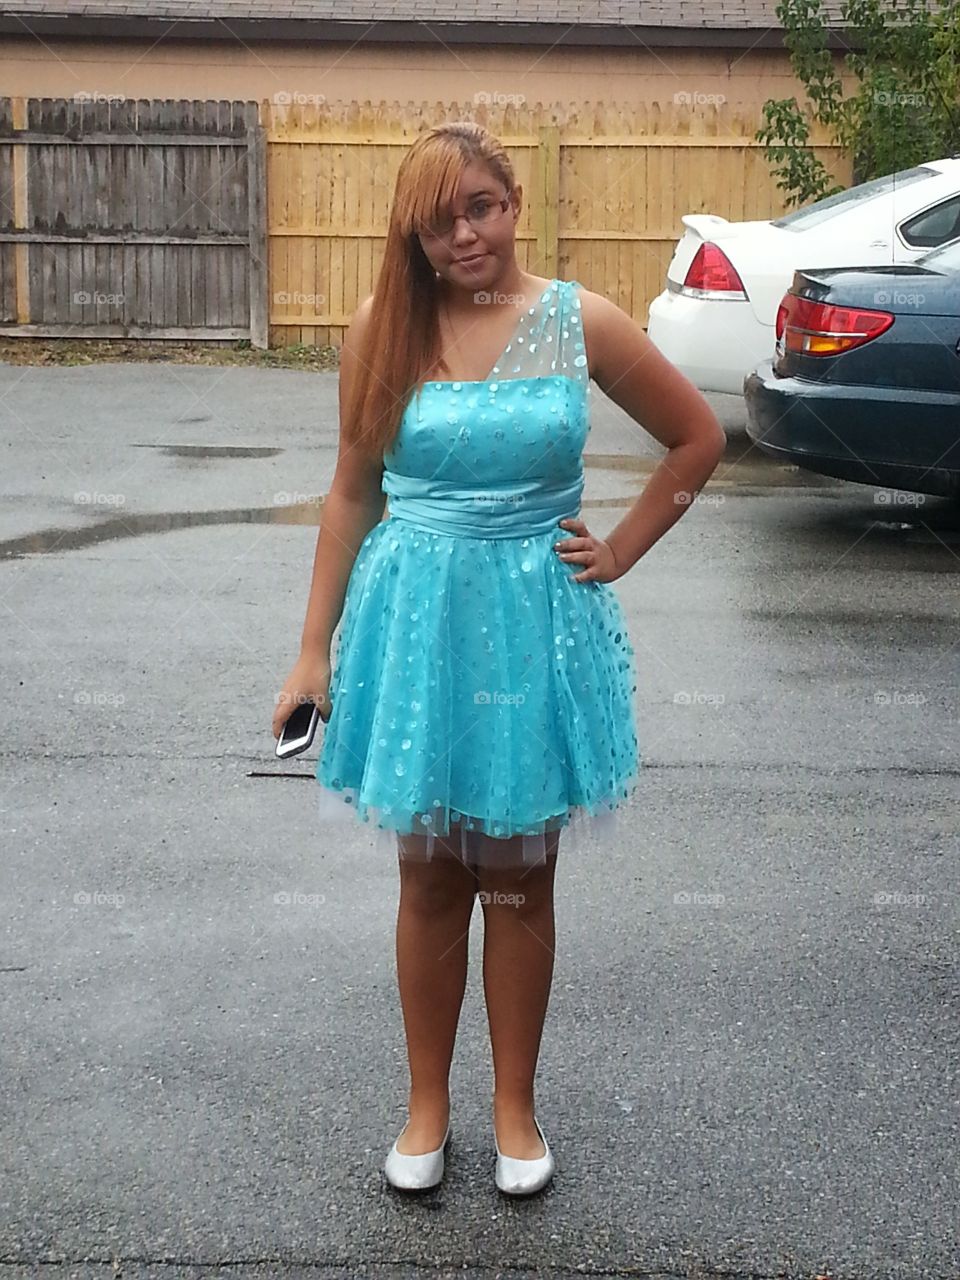 Homecoming dance. my daughter going to a homecoming dance